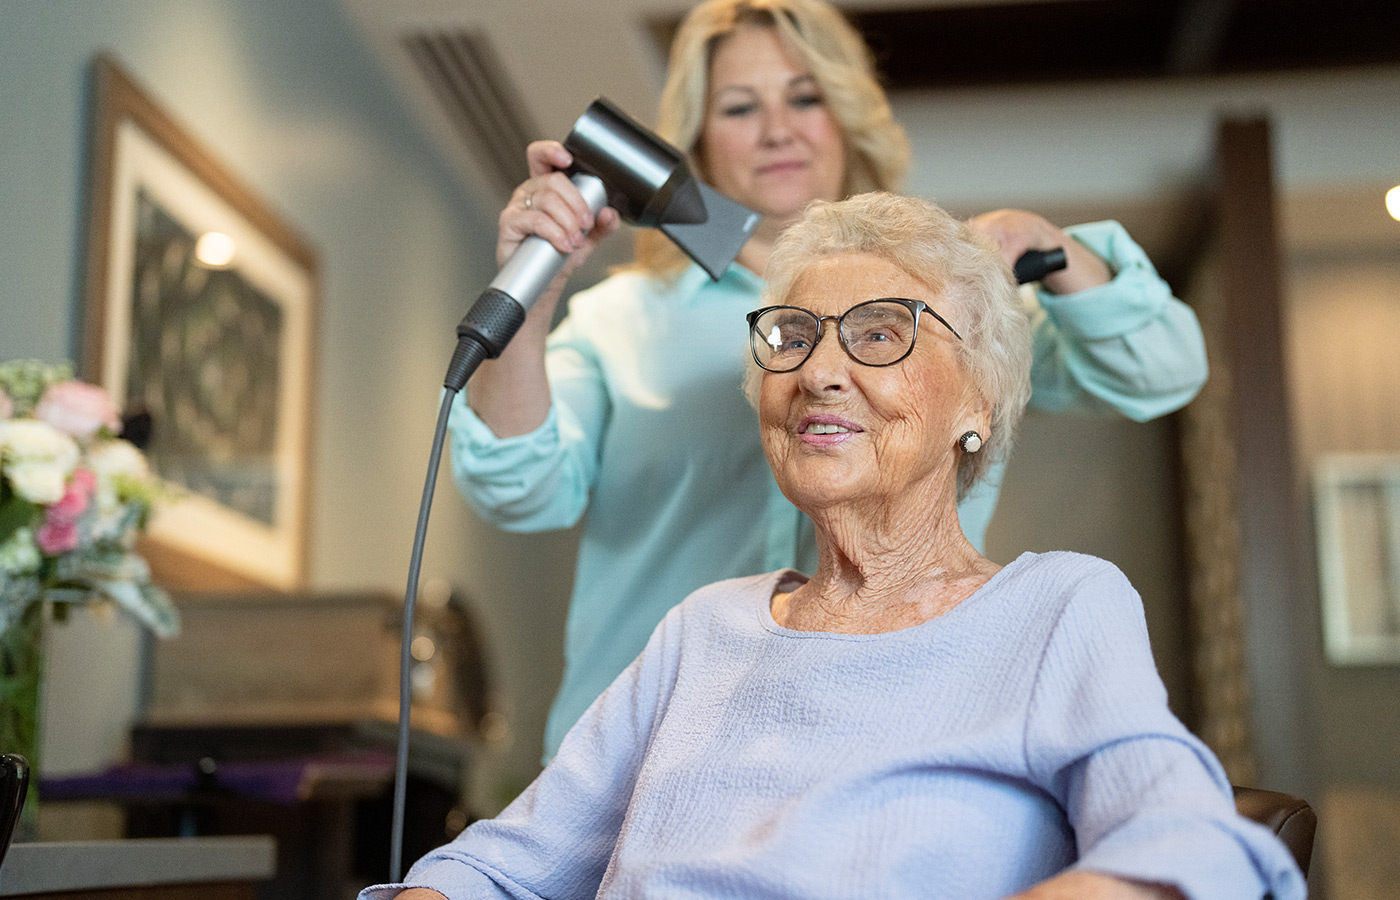 resident having her hair blow dried and styled at salon